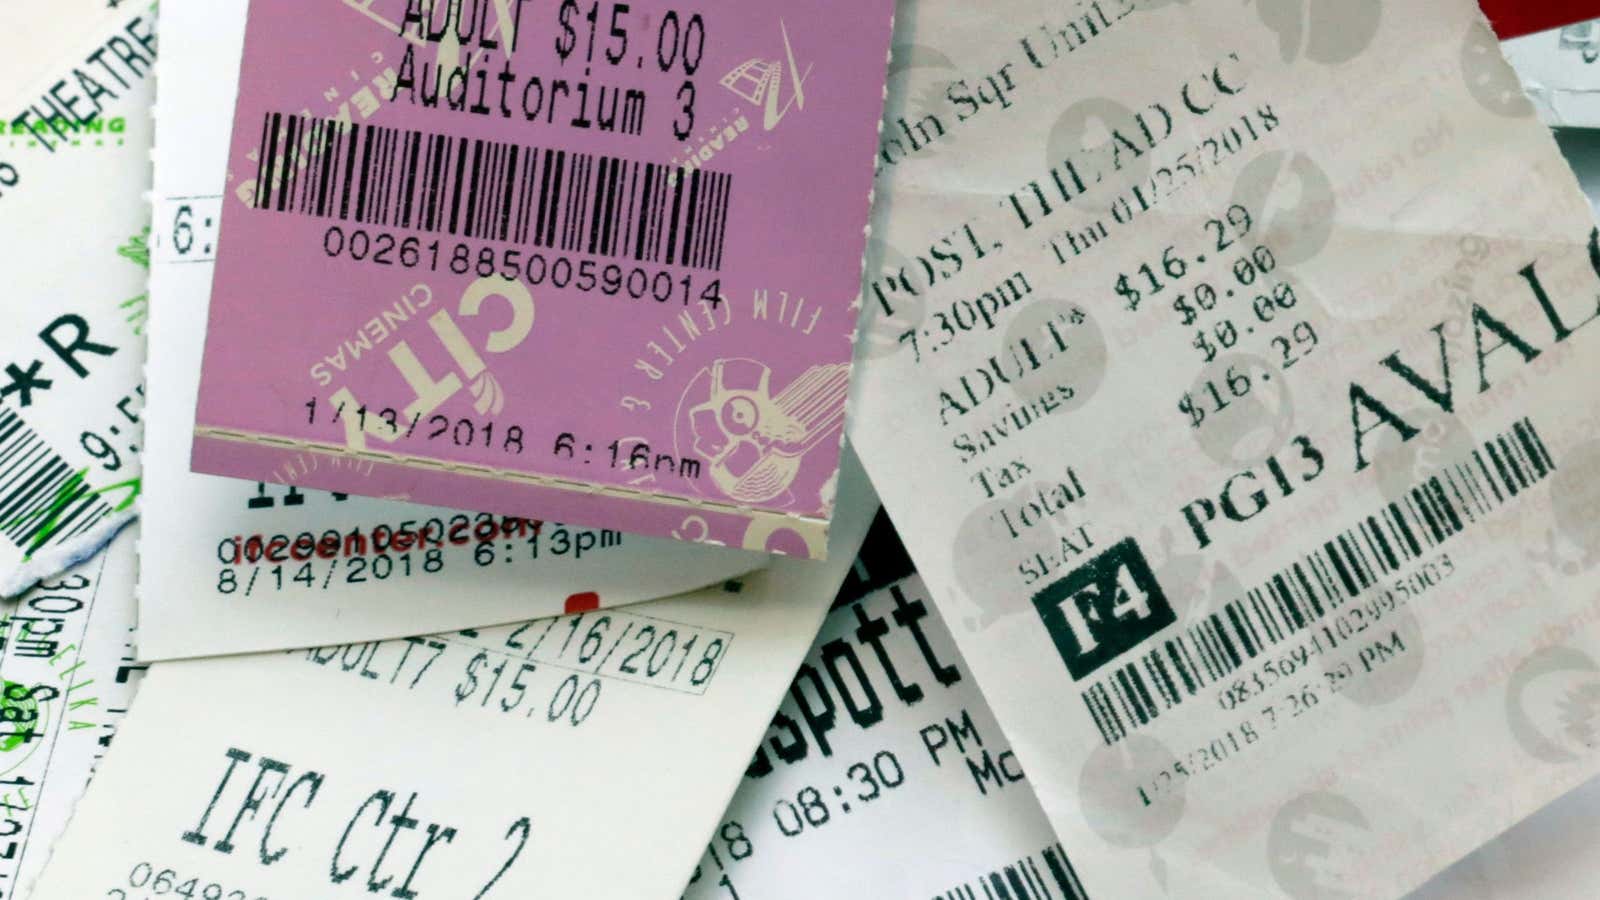 Movie-ticket subscriptions are not the only ways to save a buck.